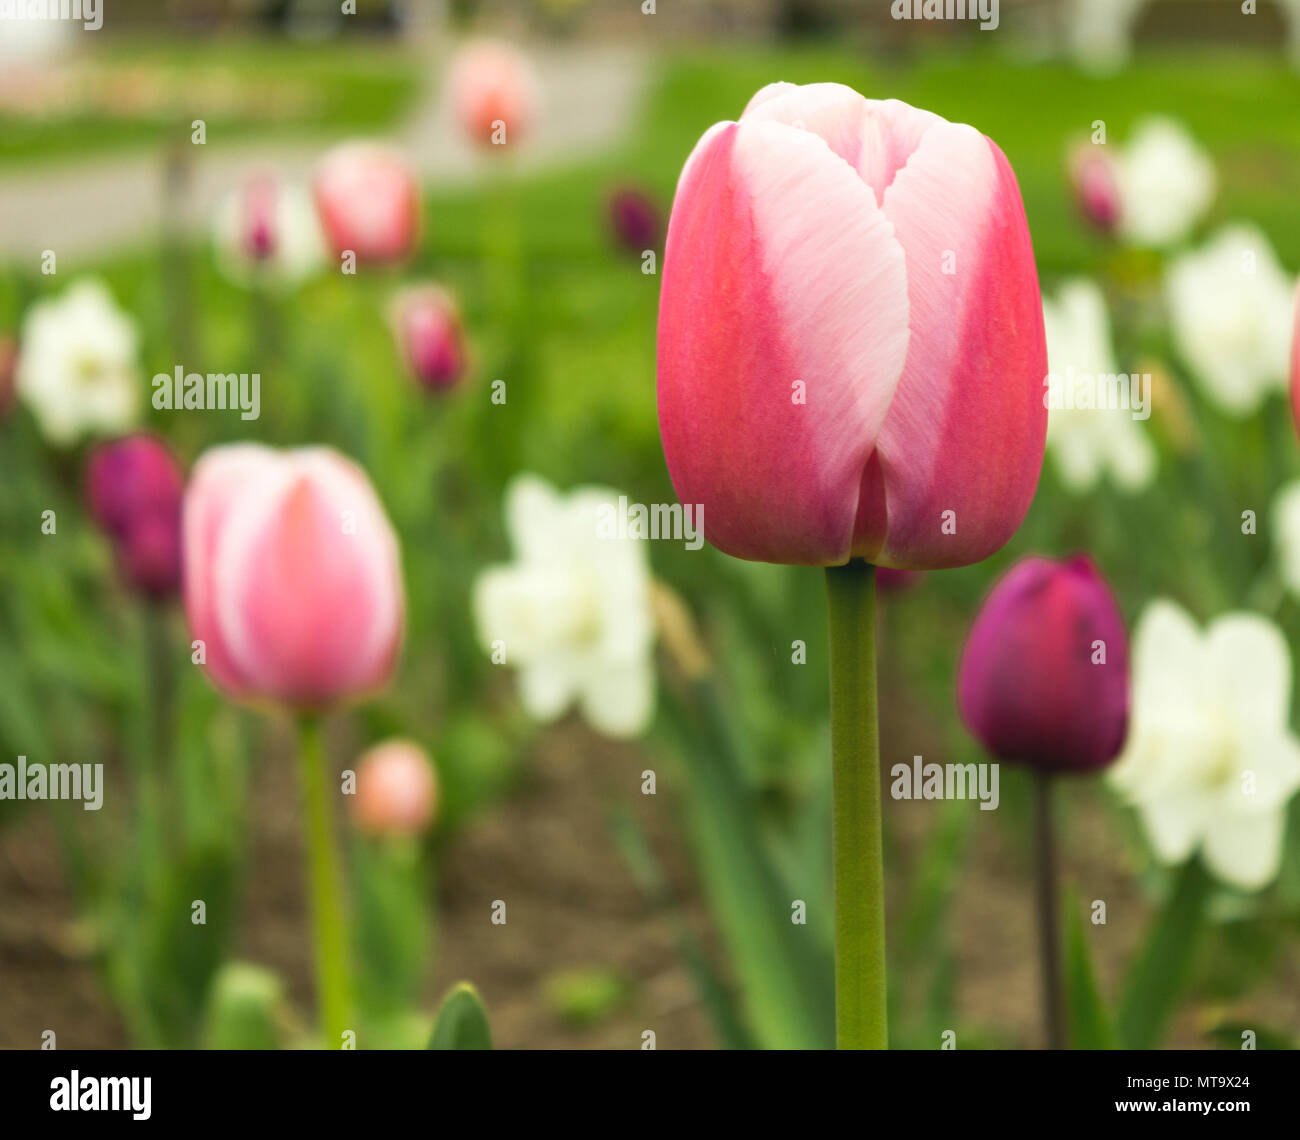 One pink and white tulip in focus against a blurred background of purple and pink tulips and white daffodils Stock Photo